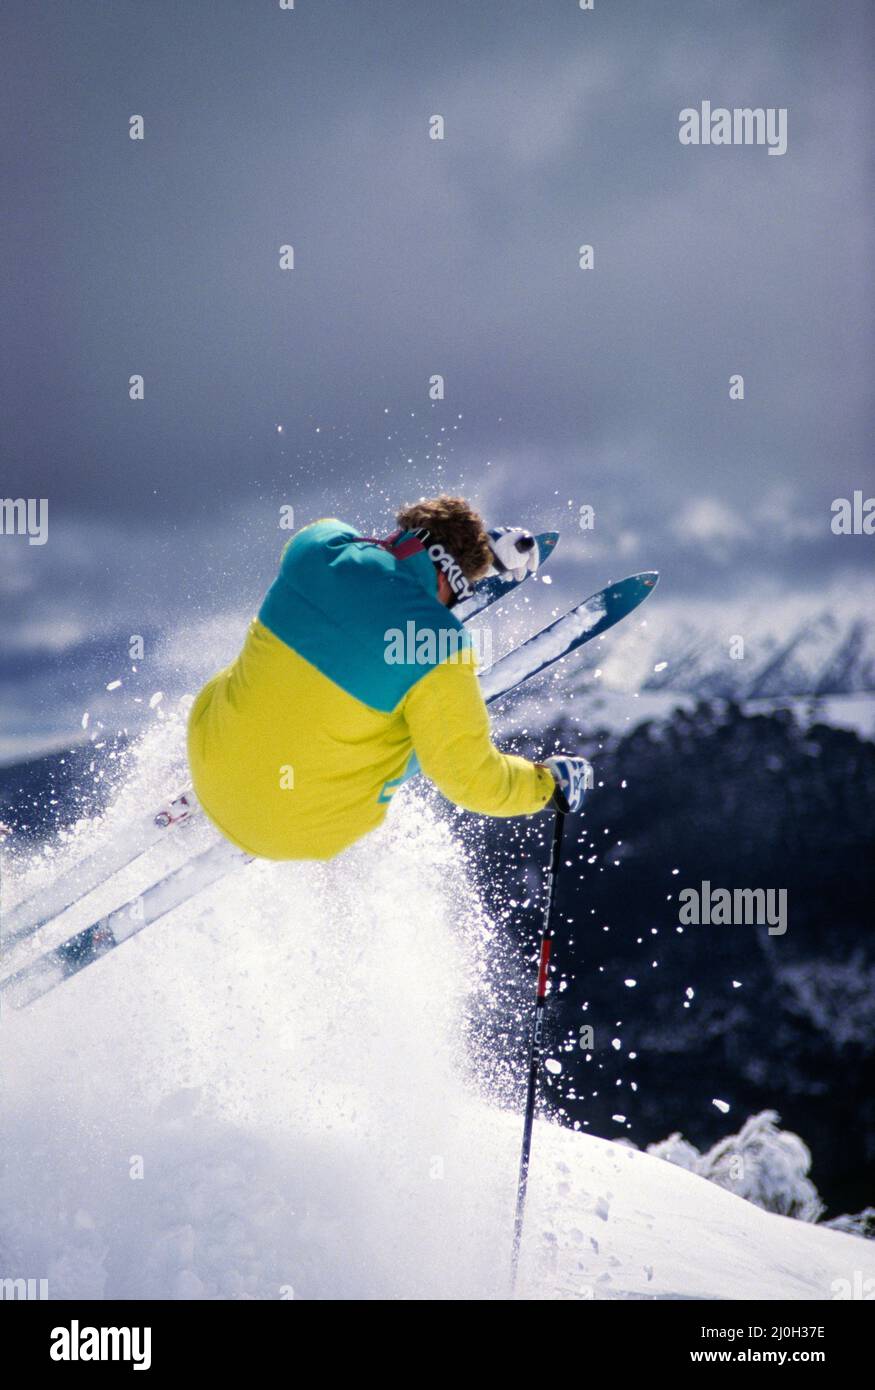 Australia. Snow skiing. Back view of young man downhill skiing jump. Stock Photo